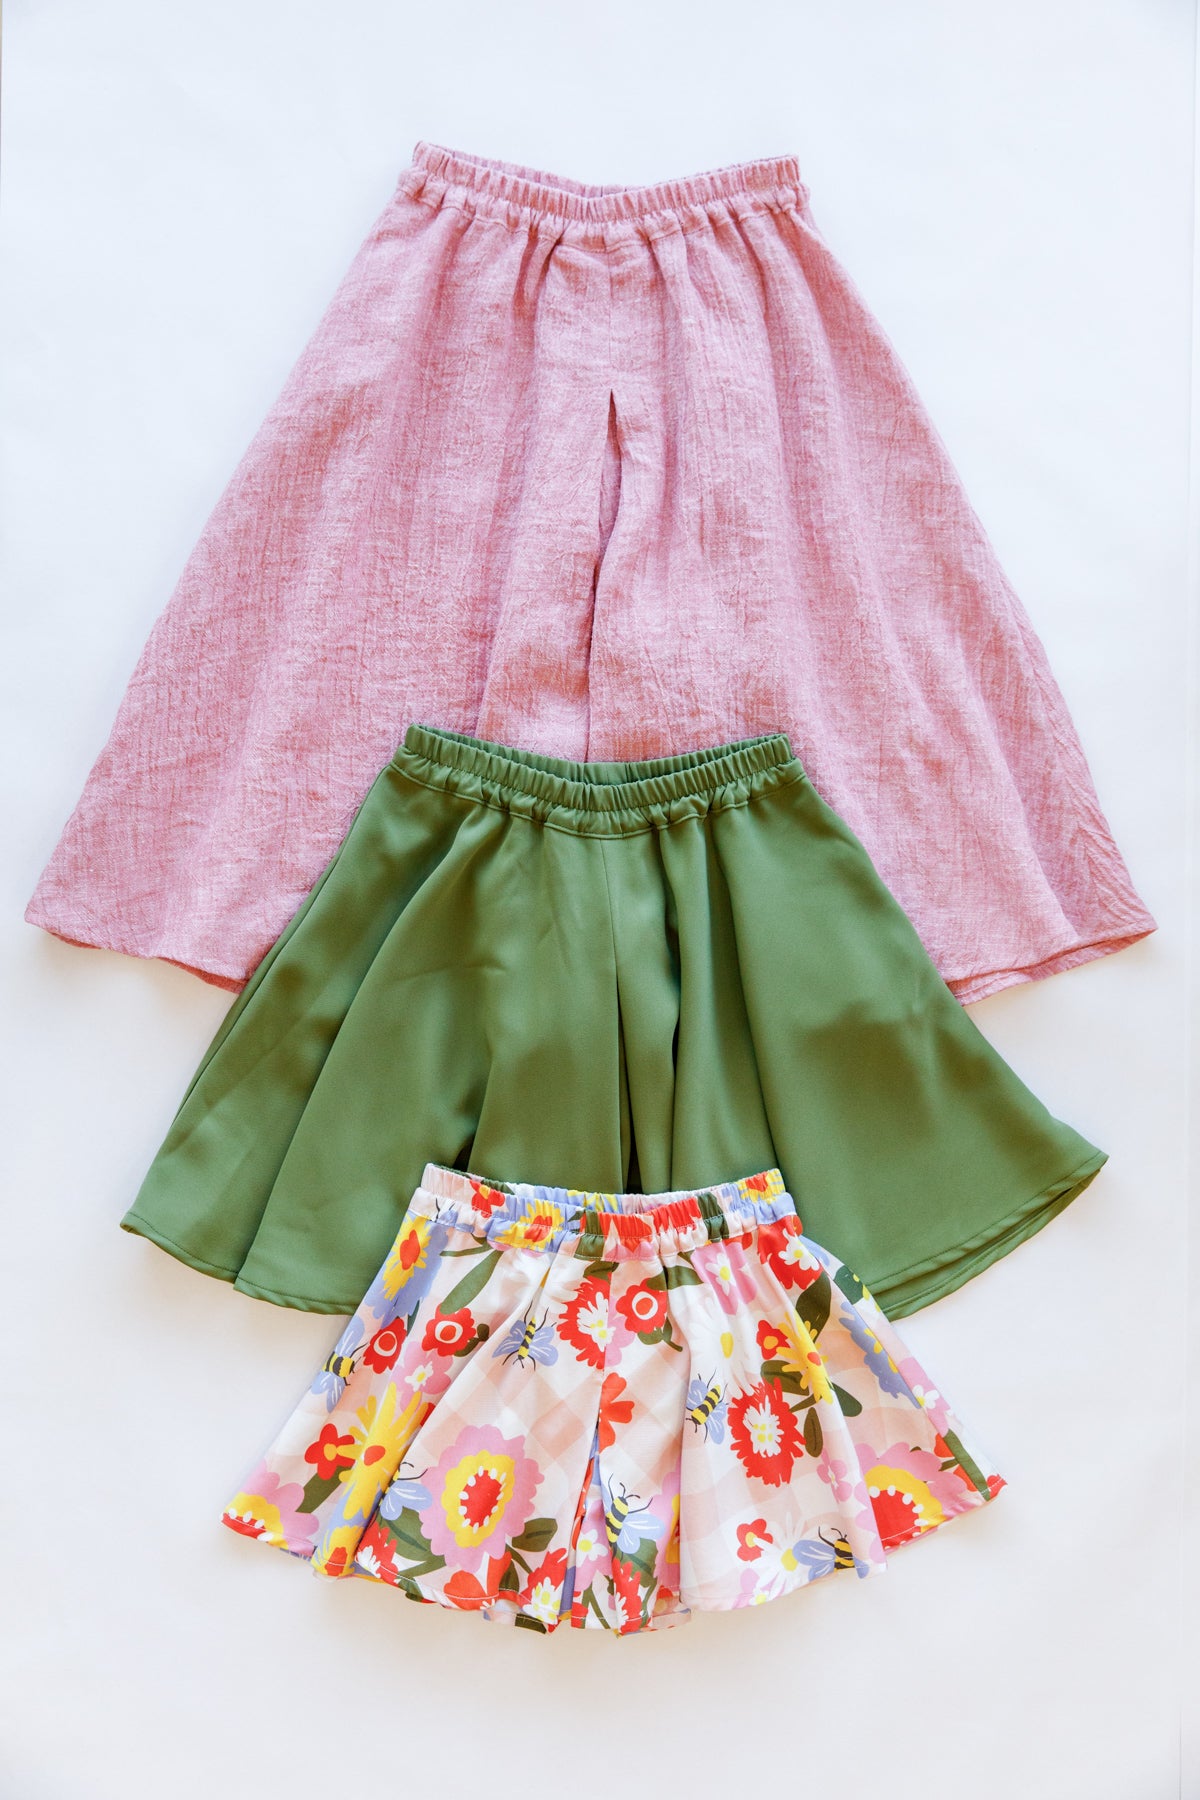 A Line Skirt Pattern For Girls With Elastic Waistband - Easy Peasy Creative  Ideas